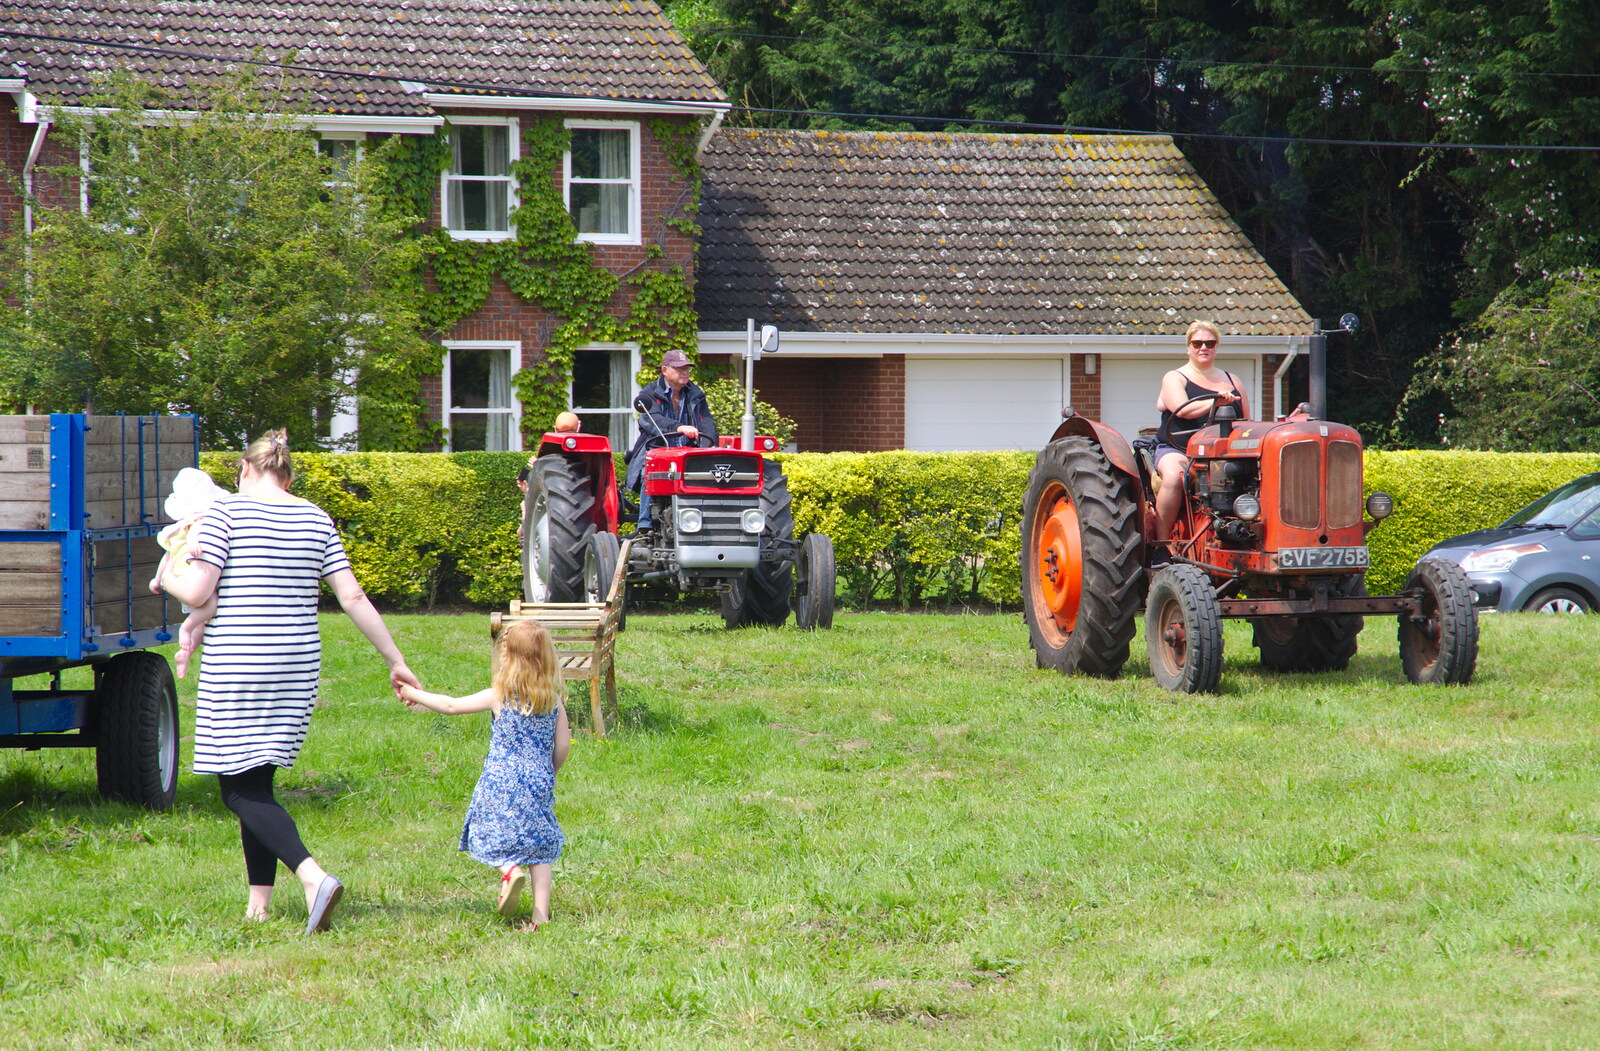 The first of the tractors trundle onto the green from A Hog Roast on Little Green, Thrandeston, Suffolk - 23rd June 2019